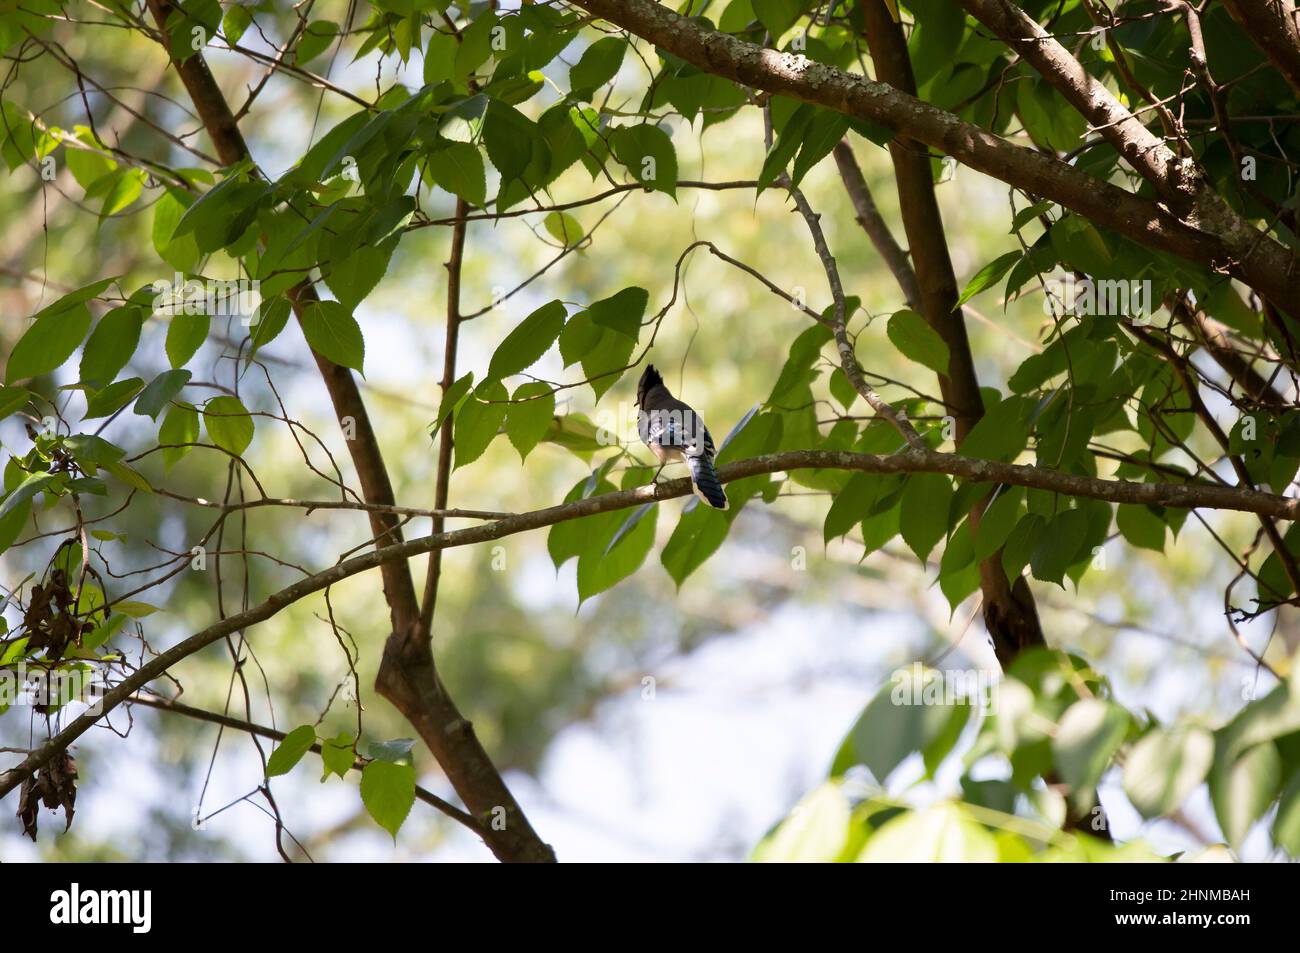 Blue jay (Cyanocitta cristata) cawing from a perch on a tree branch Stock Photo